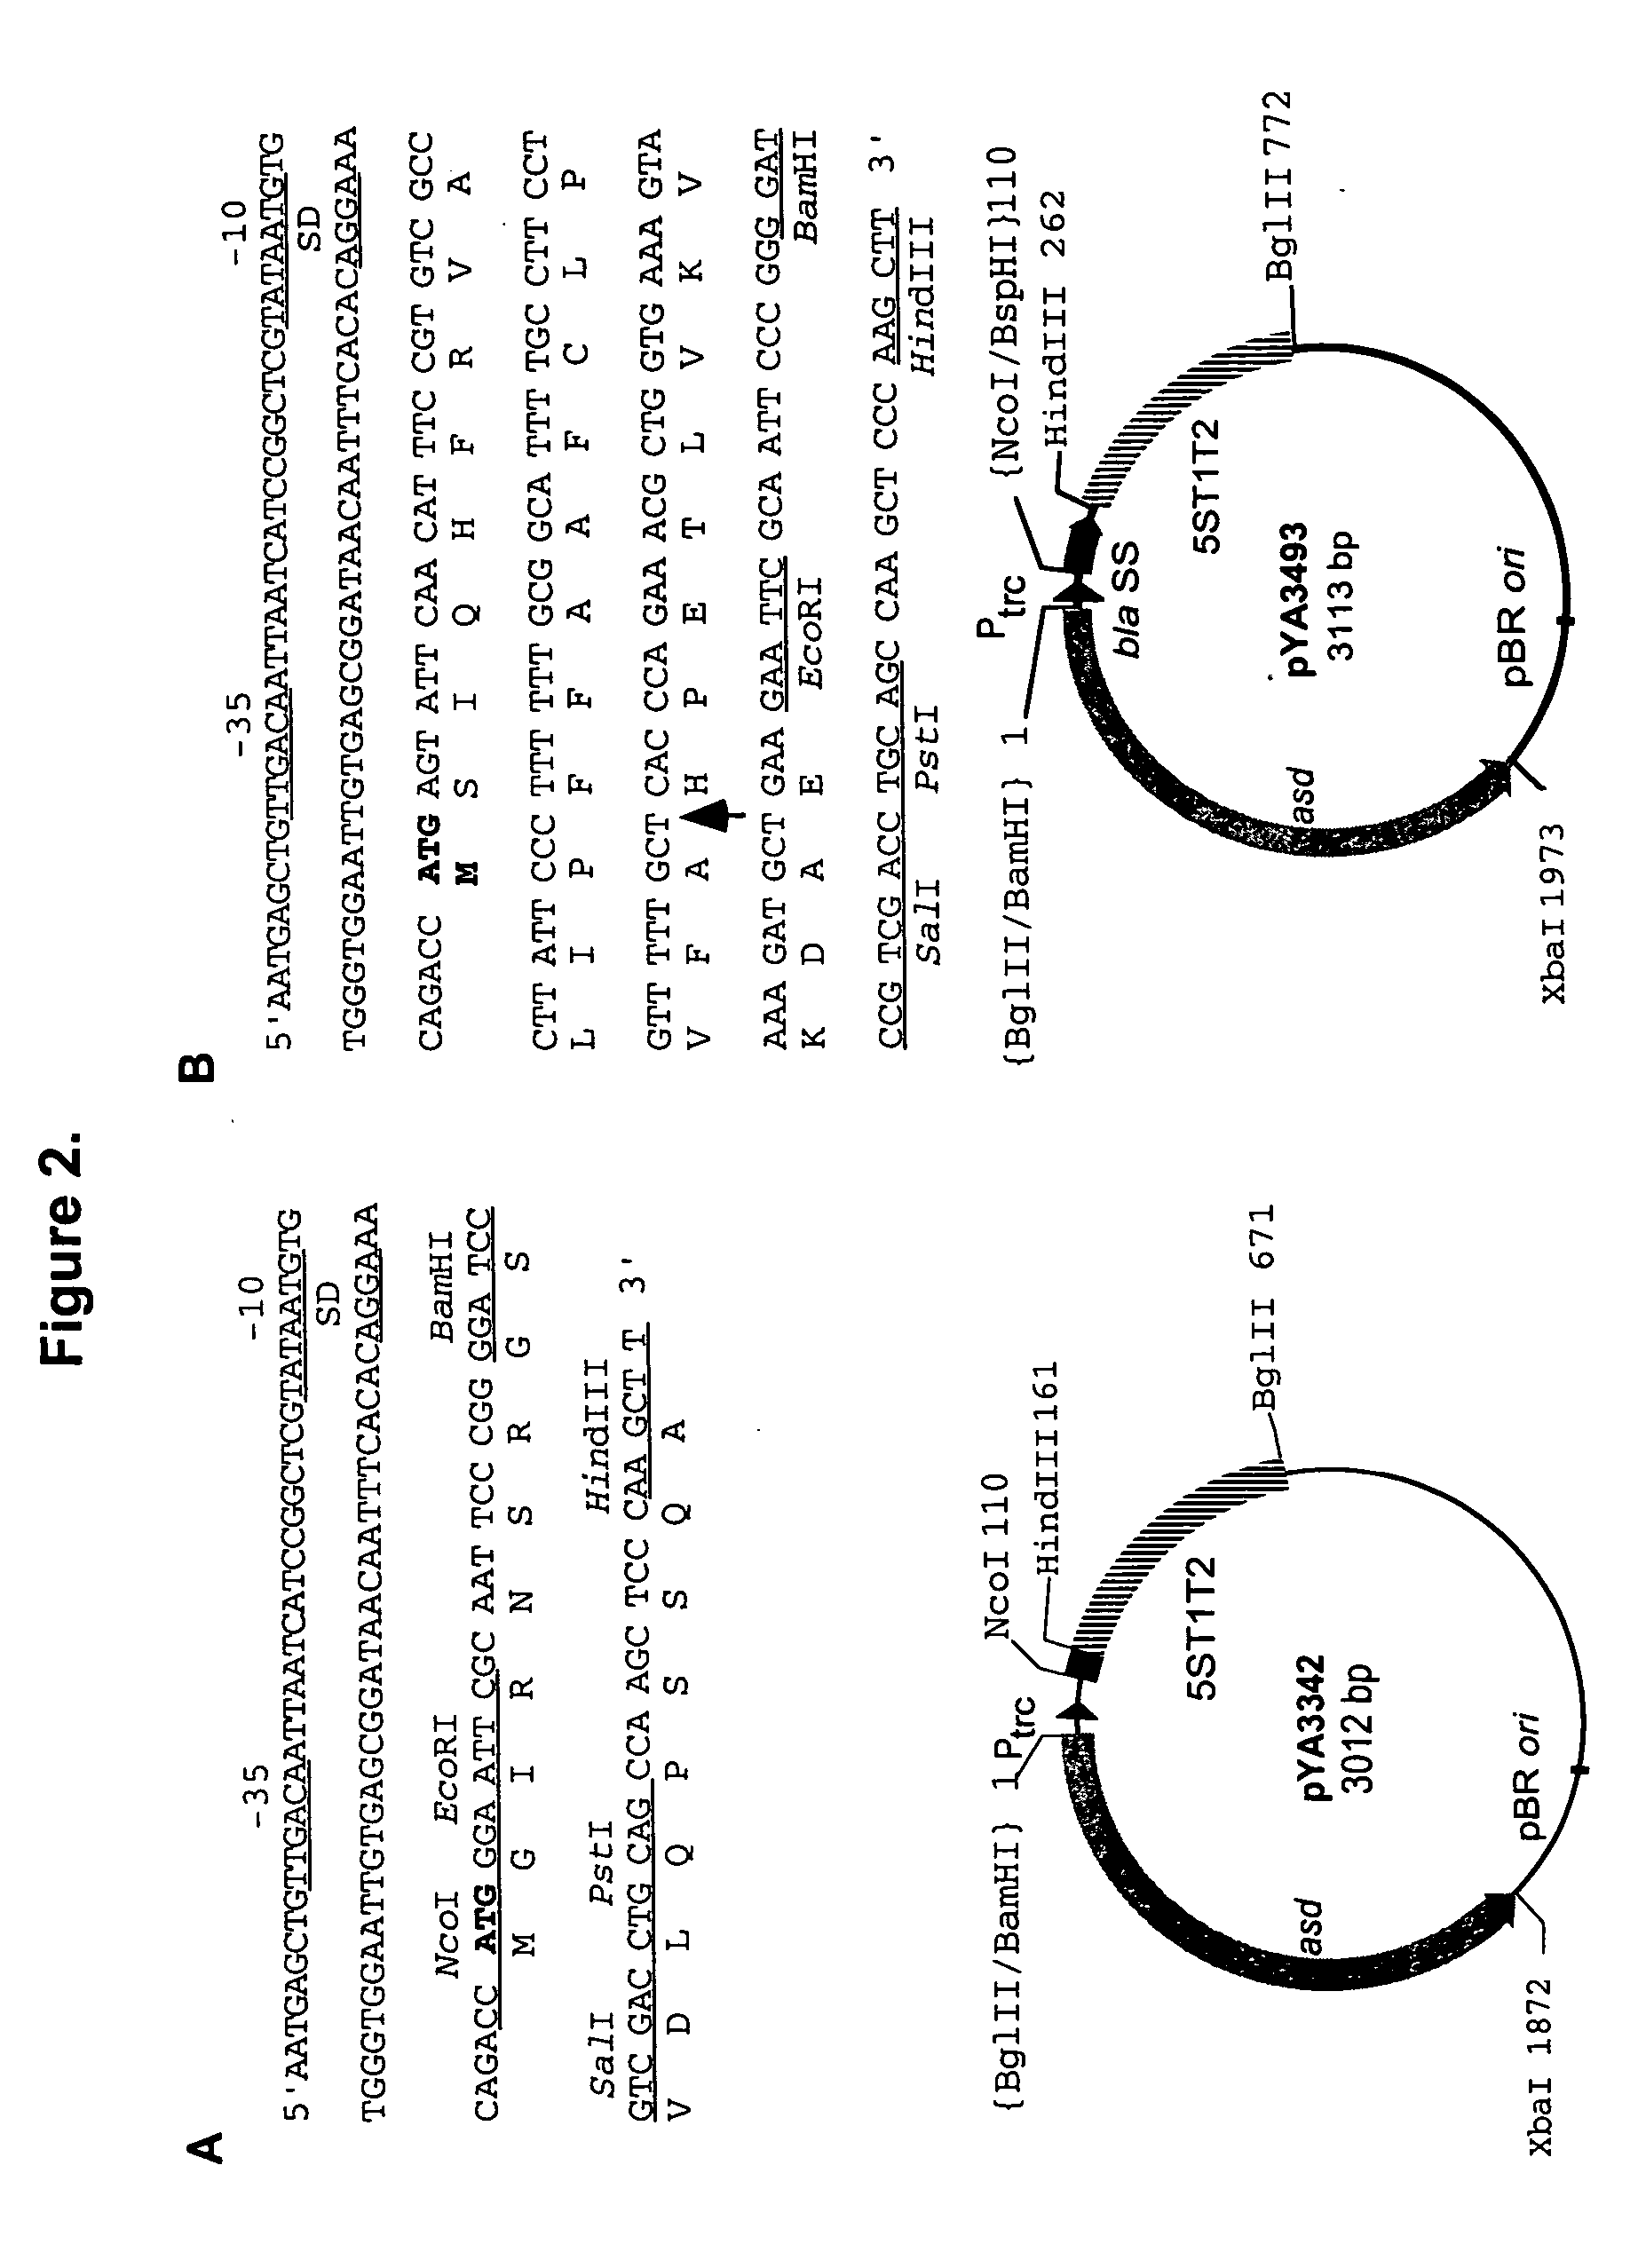 Immunogenic compositions and vaccines comprising carrier bacteria that secrete antigens